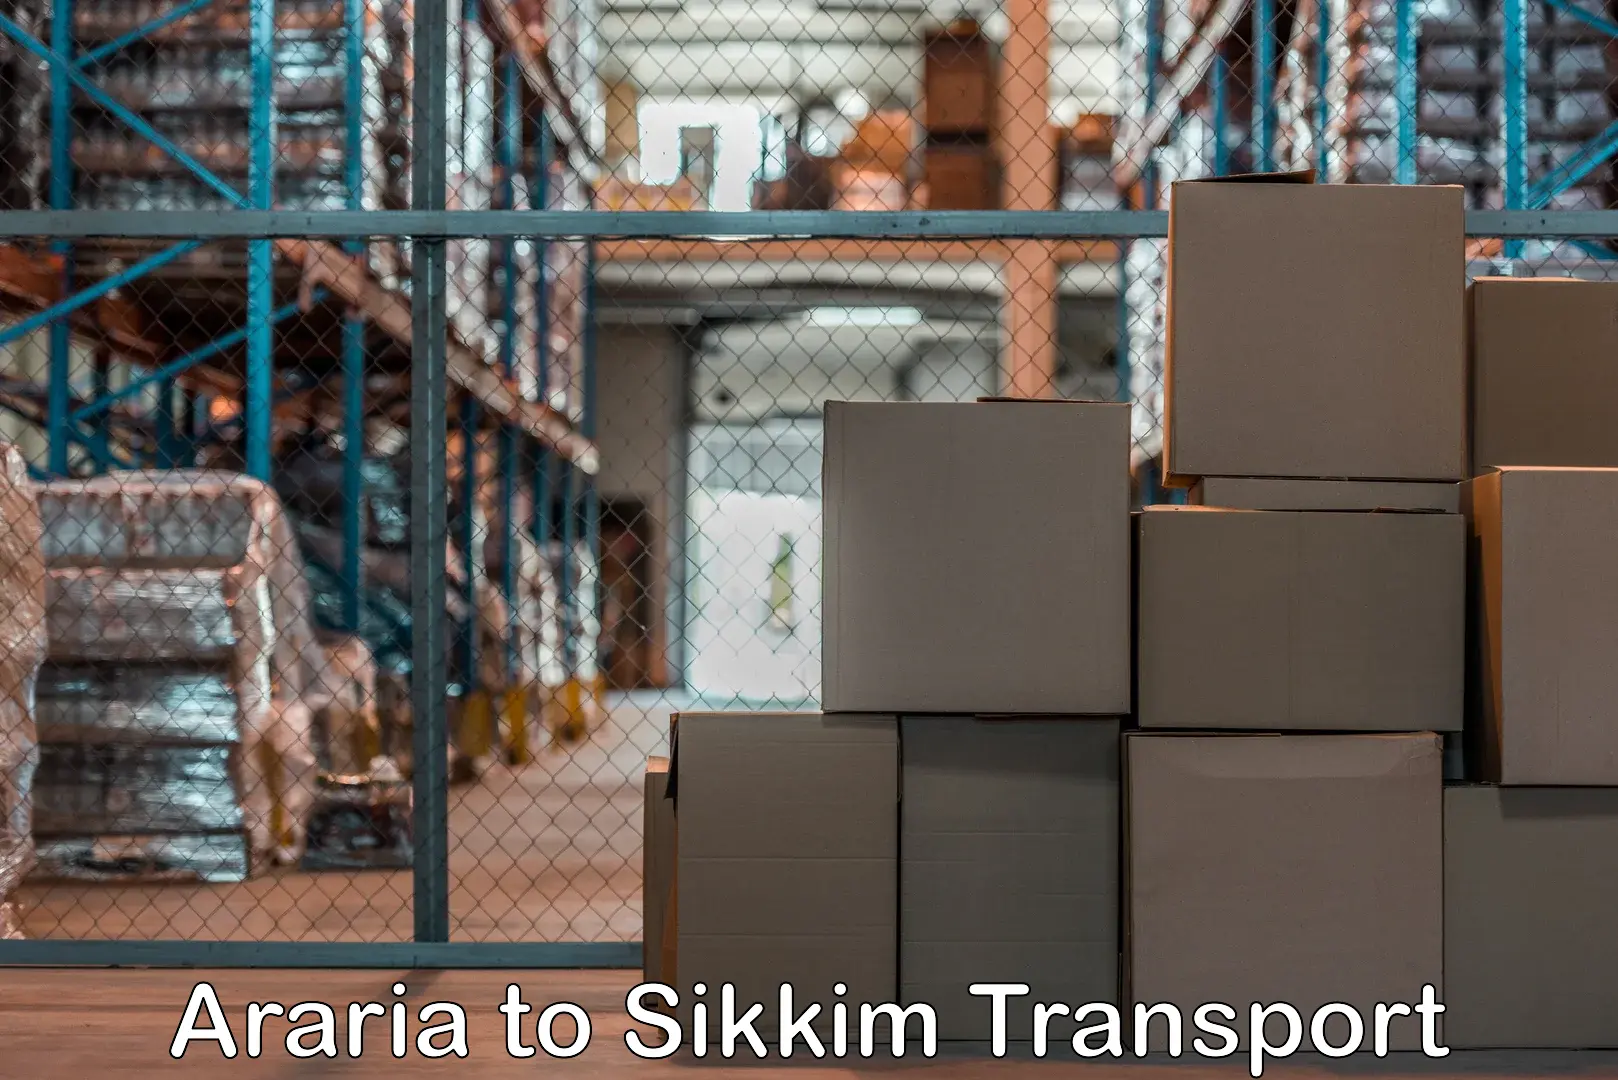 Online transport service Araria to East Sikkim